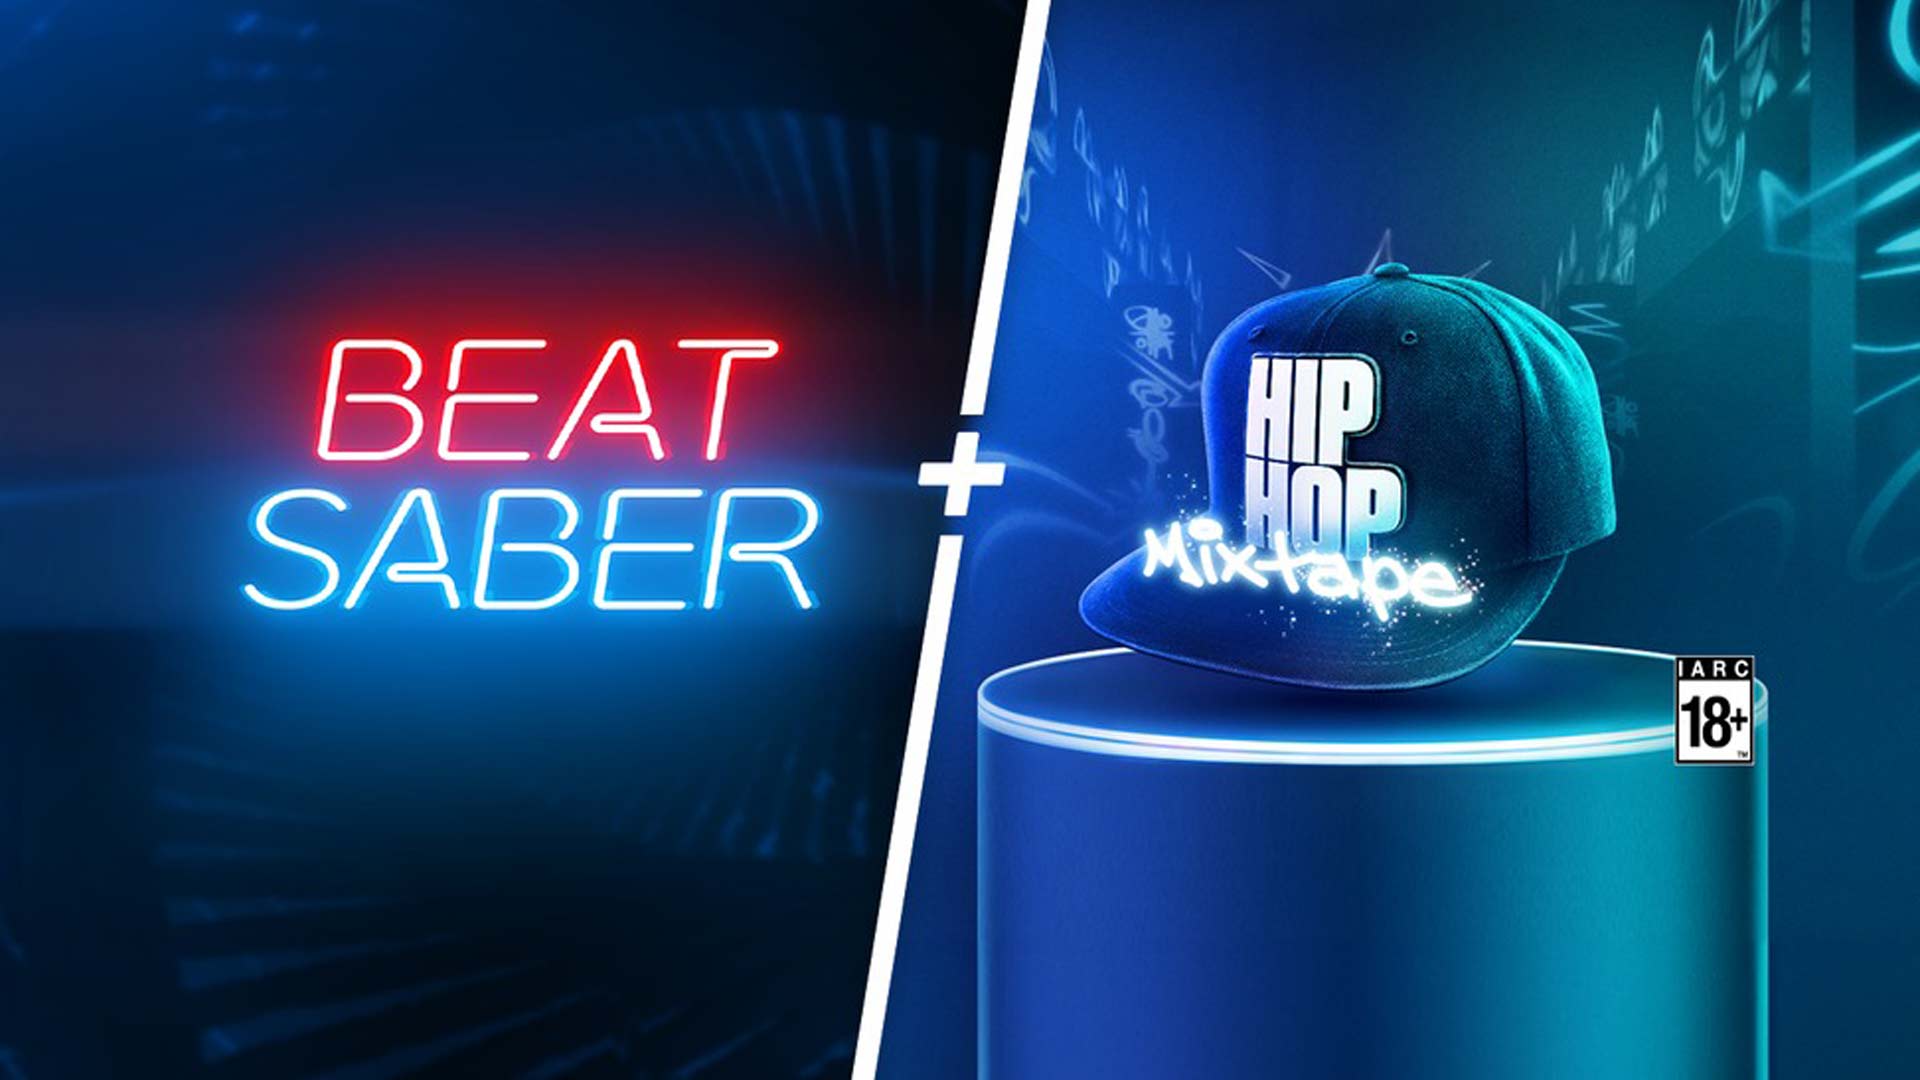 ‘Beat Saber’ Gets Its First Hip Hop Mixtape, Including Uncensored Tracks from Snoop, 2Pac, Dr Dre & More